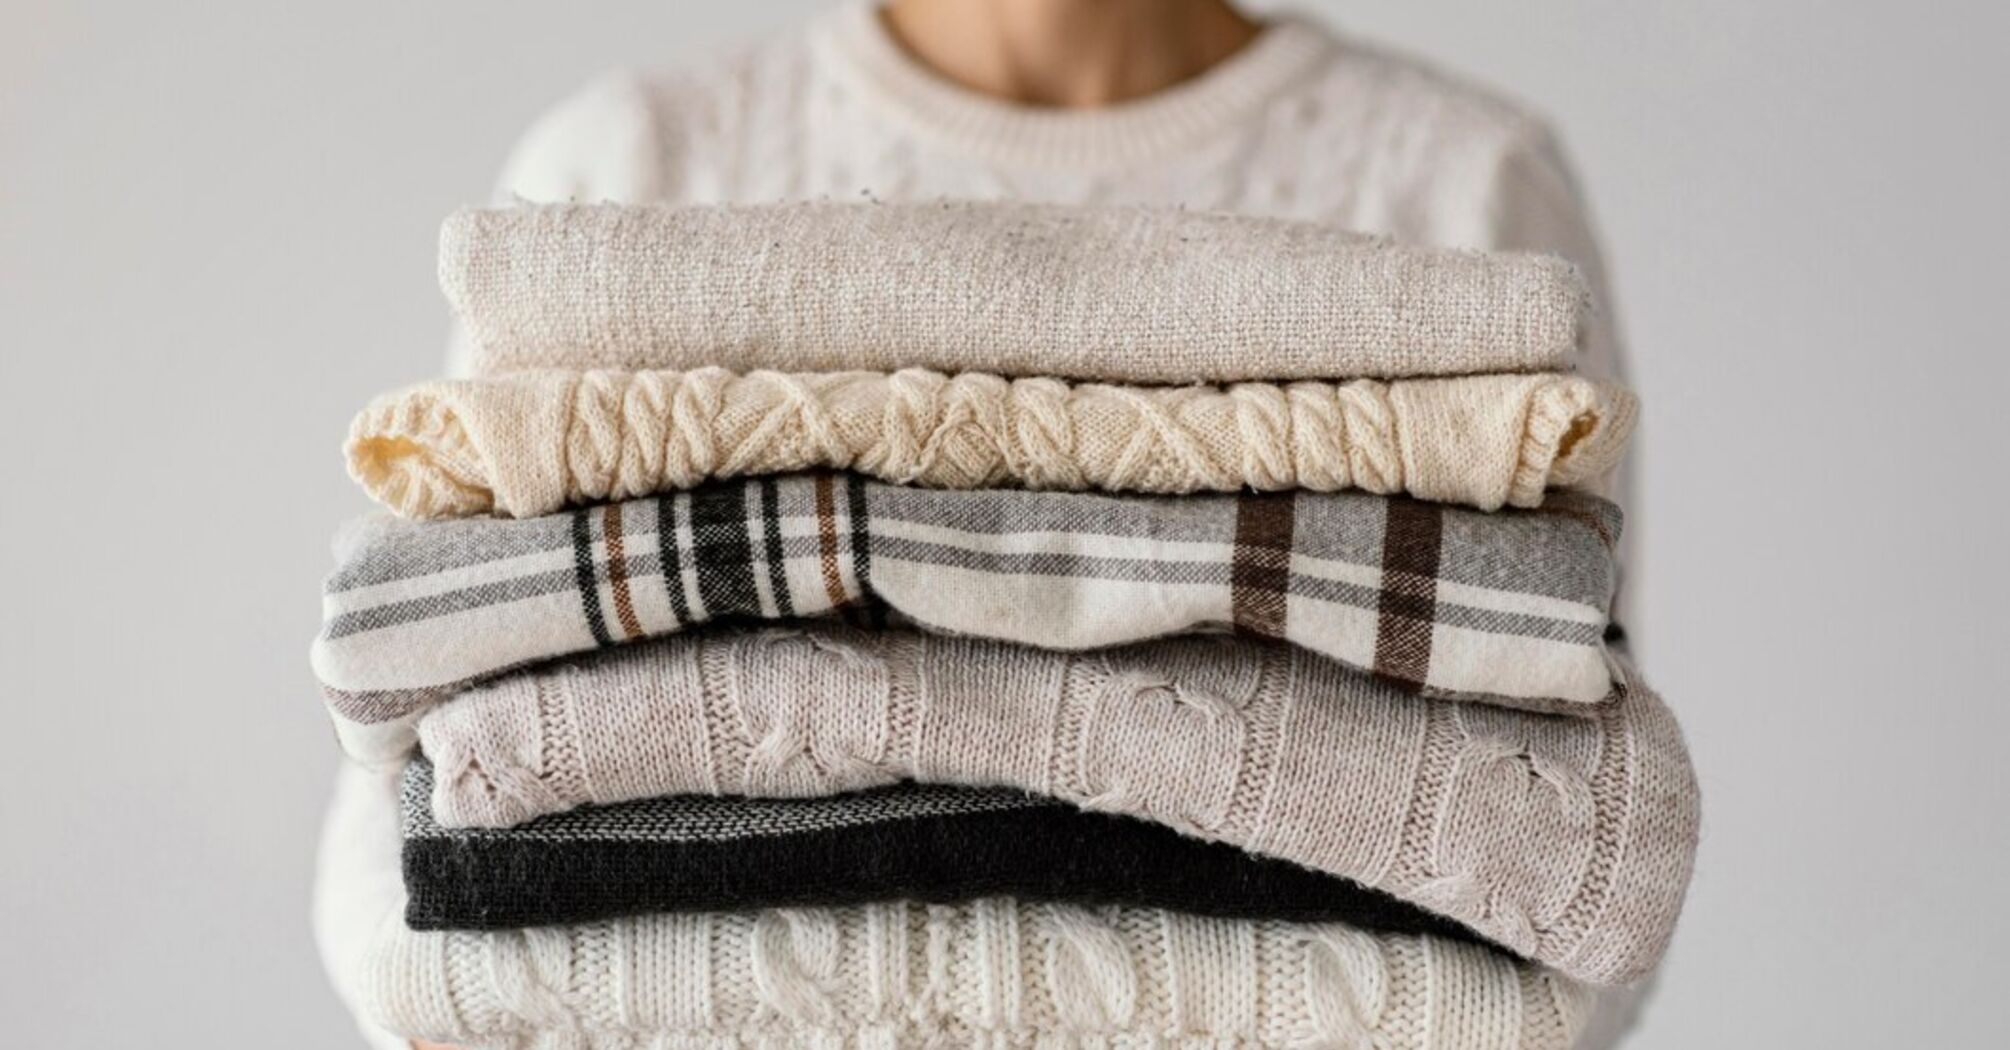 How to care for knitted sweaters properly: important tips